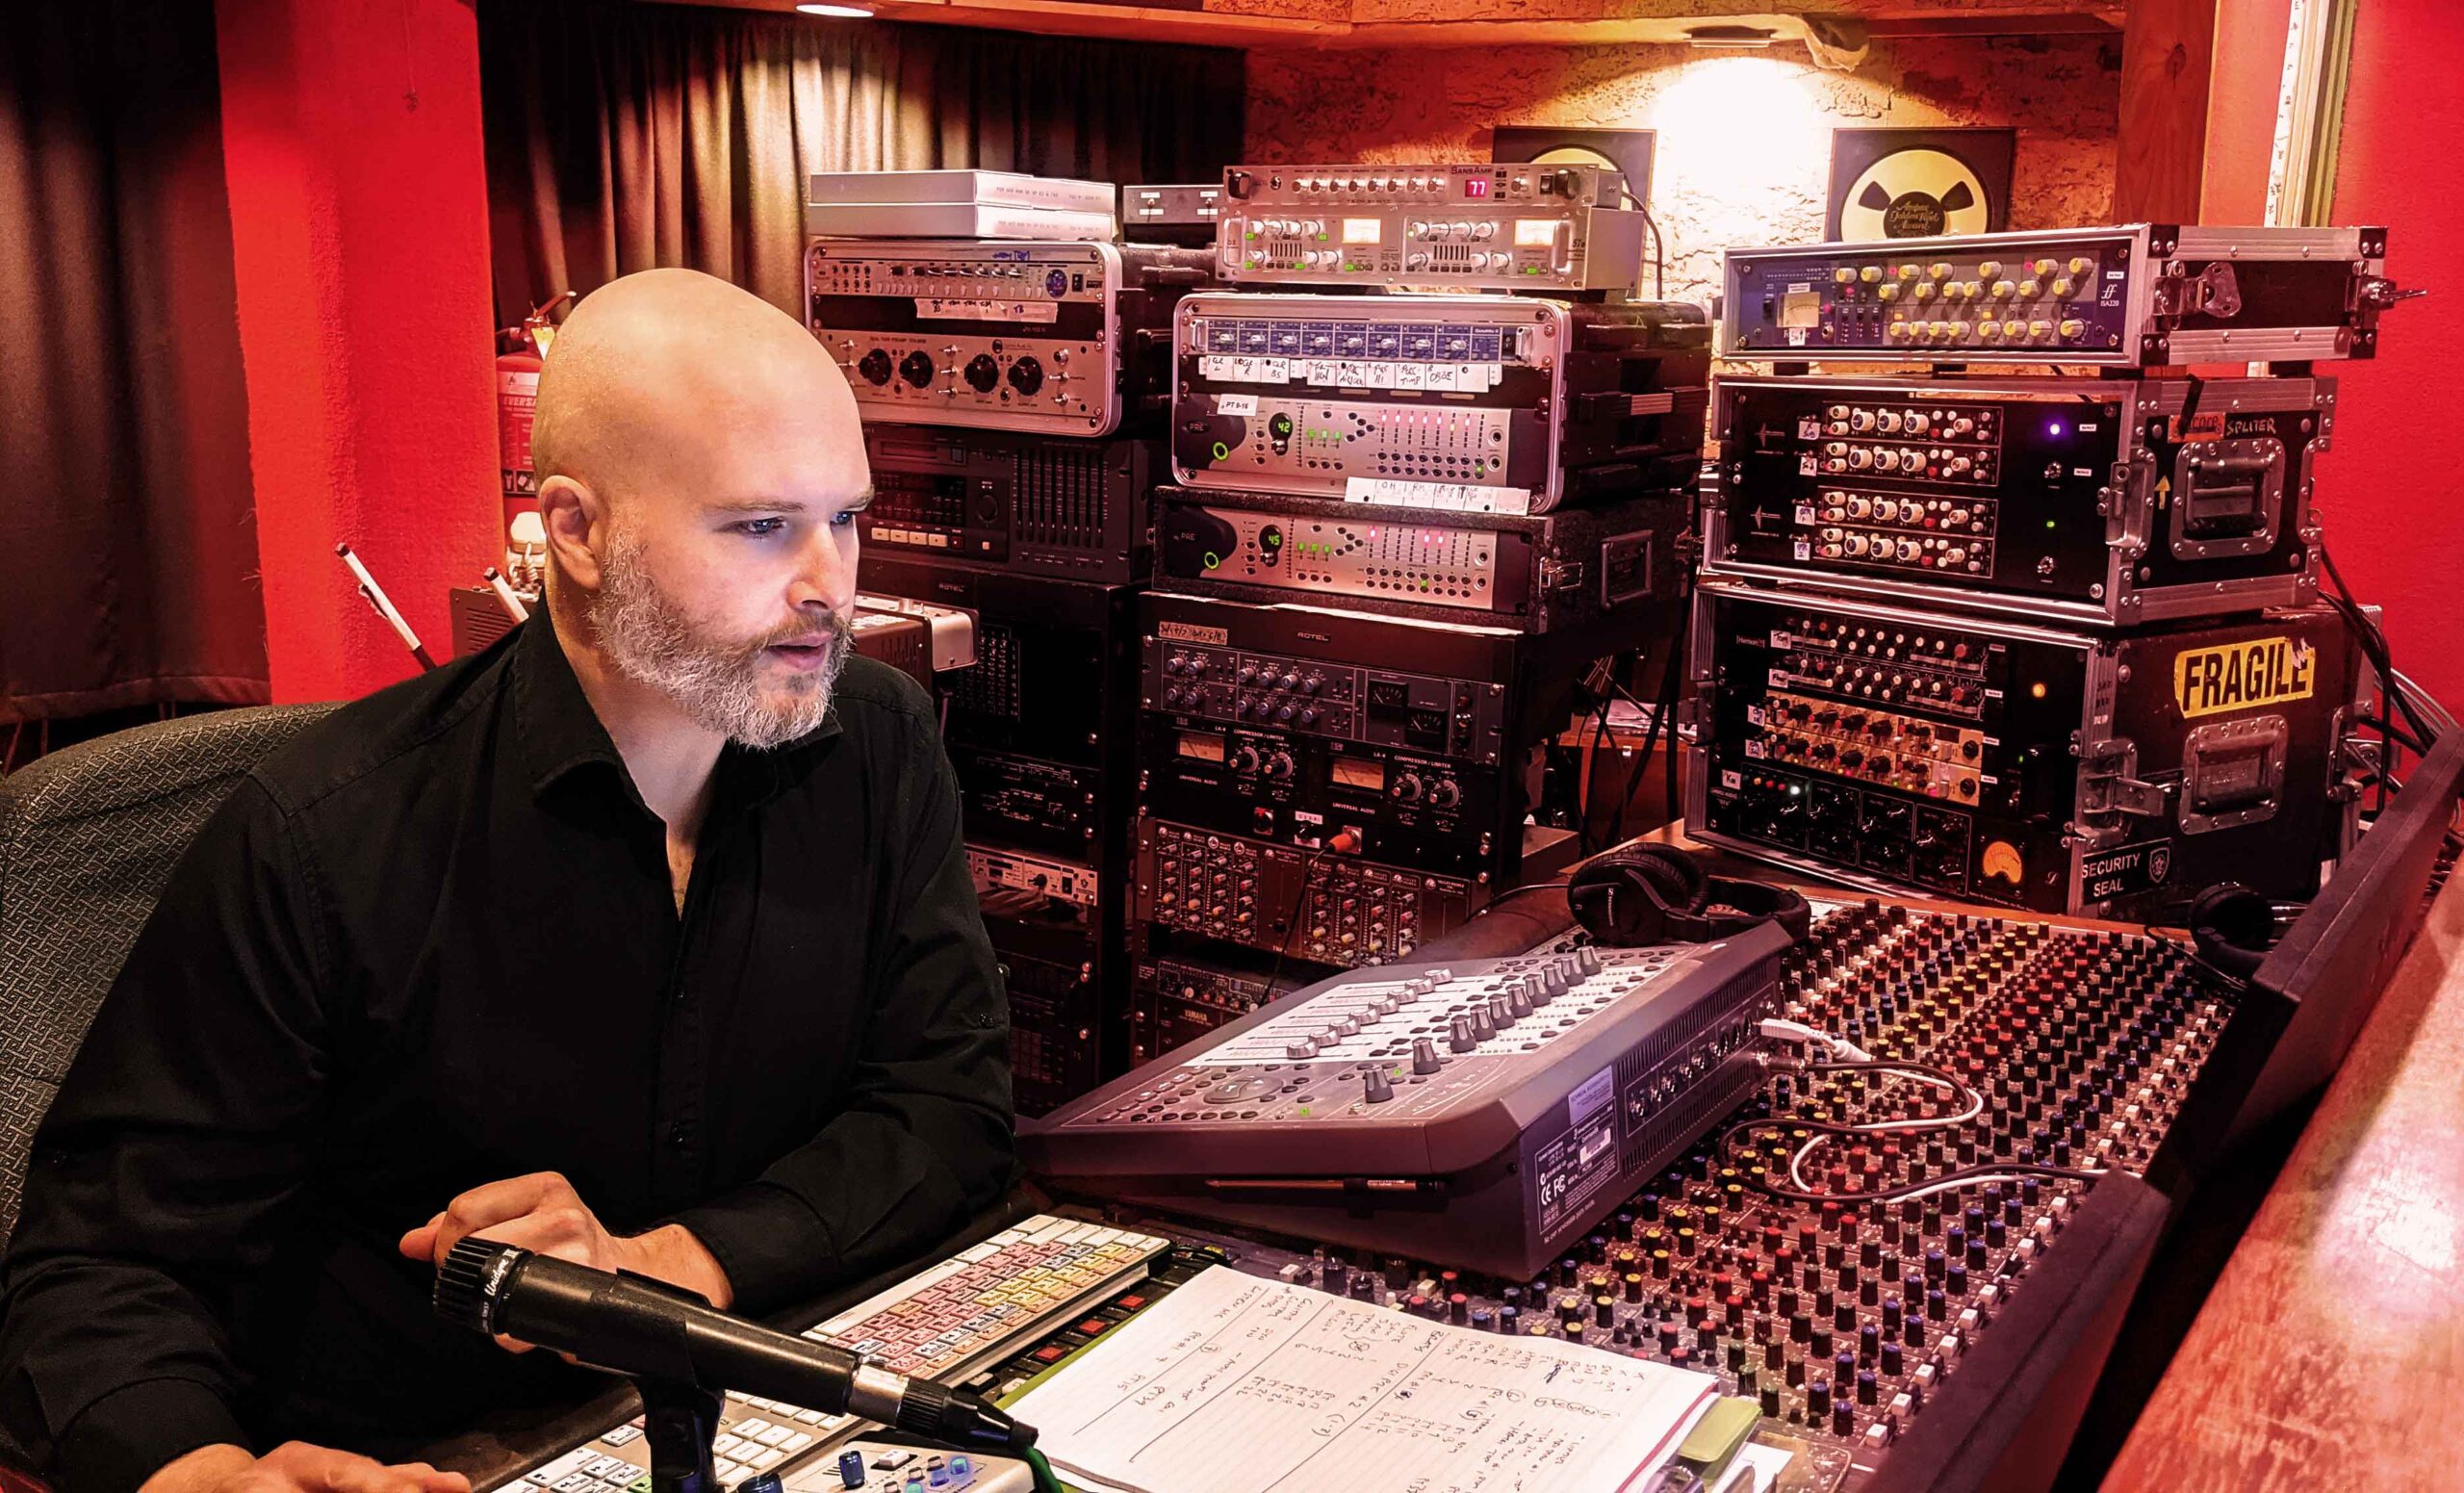 Melbourne based Producer Engineer Daniel Jason Booth in the studio surrounded by analog equipment